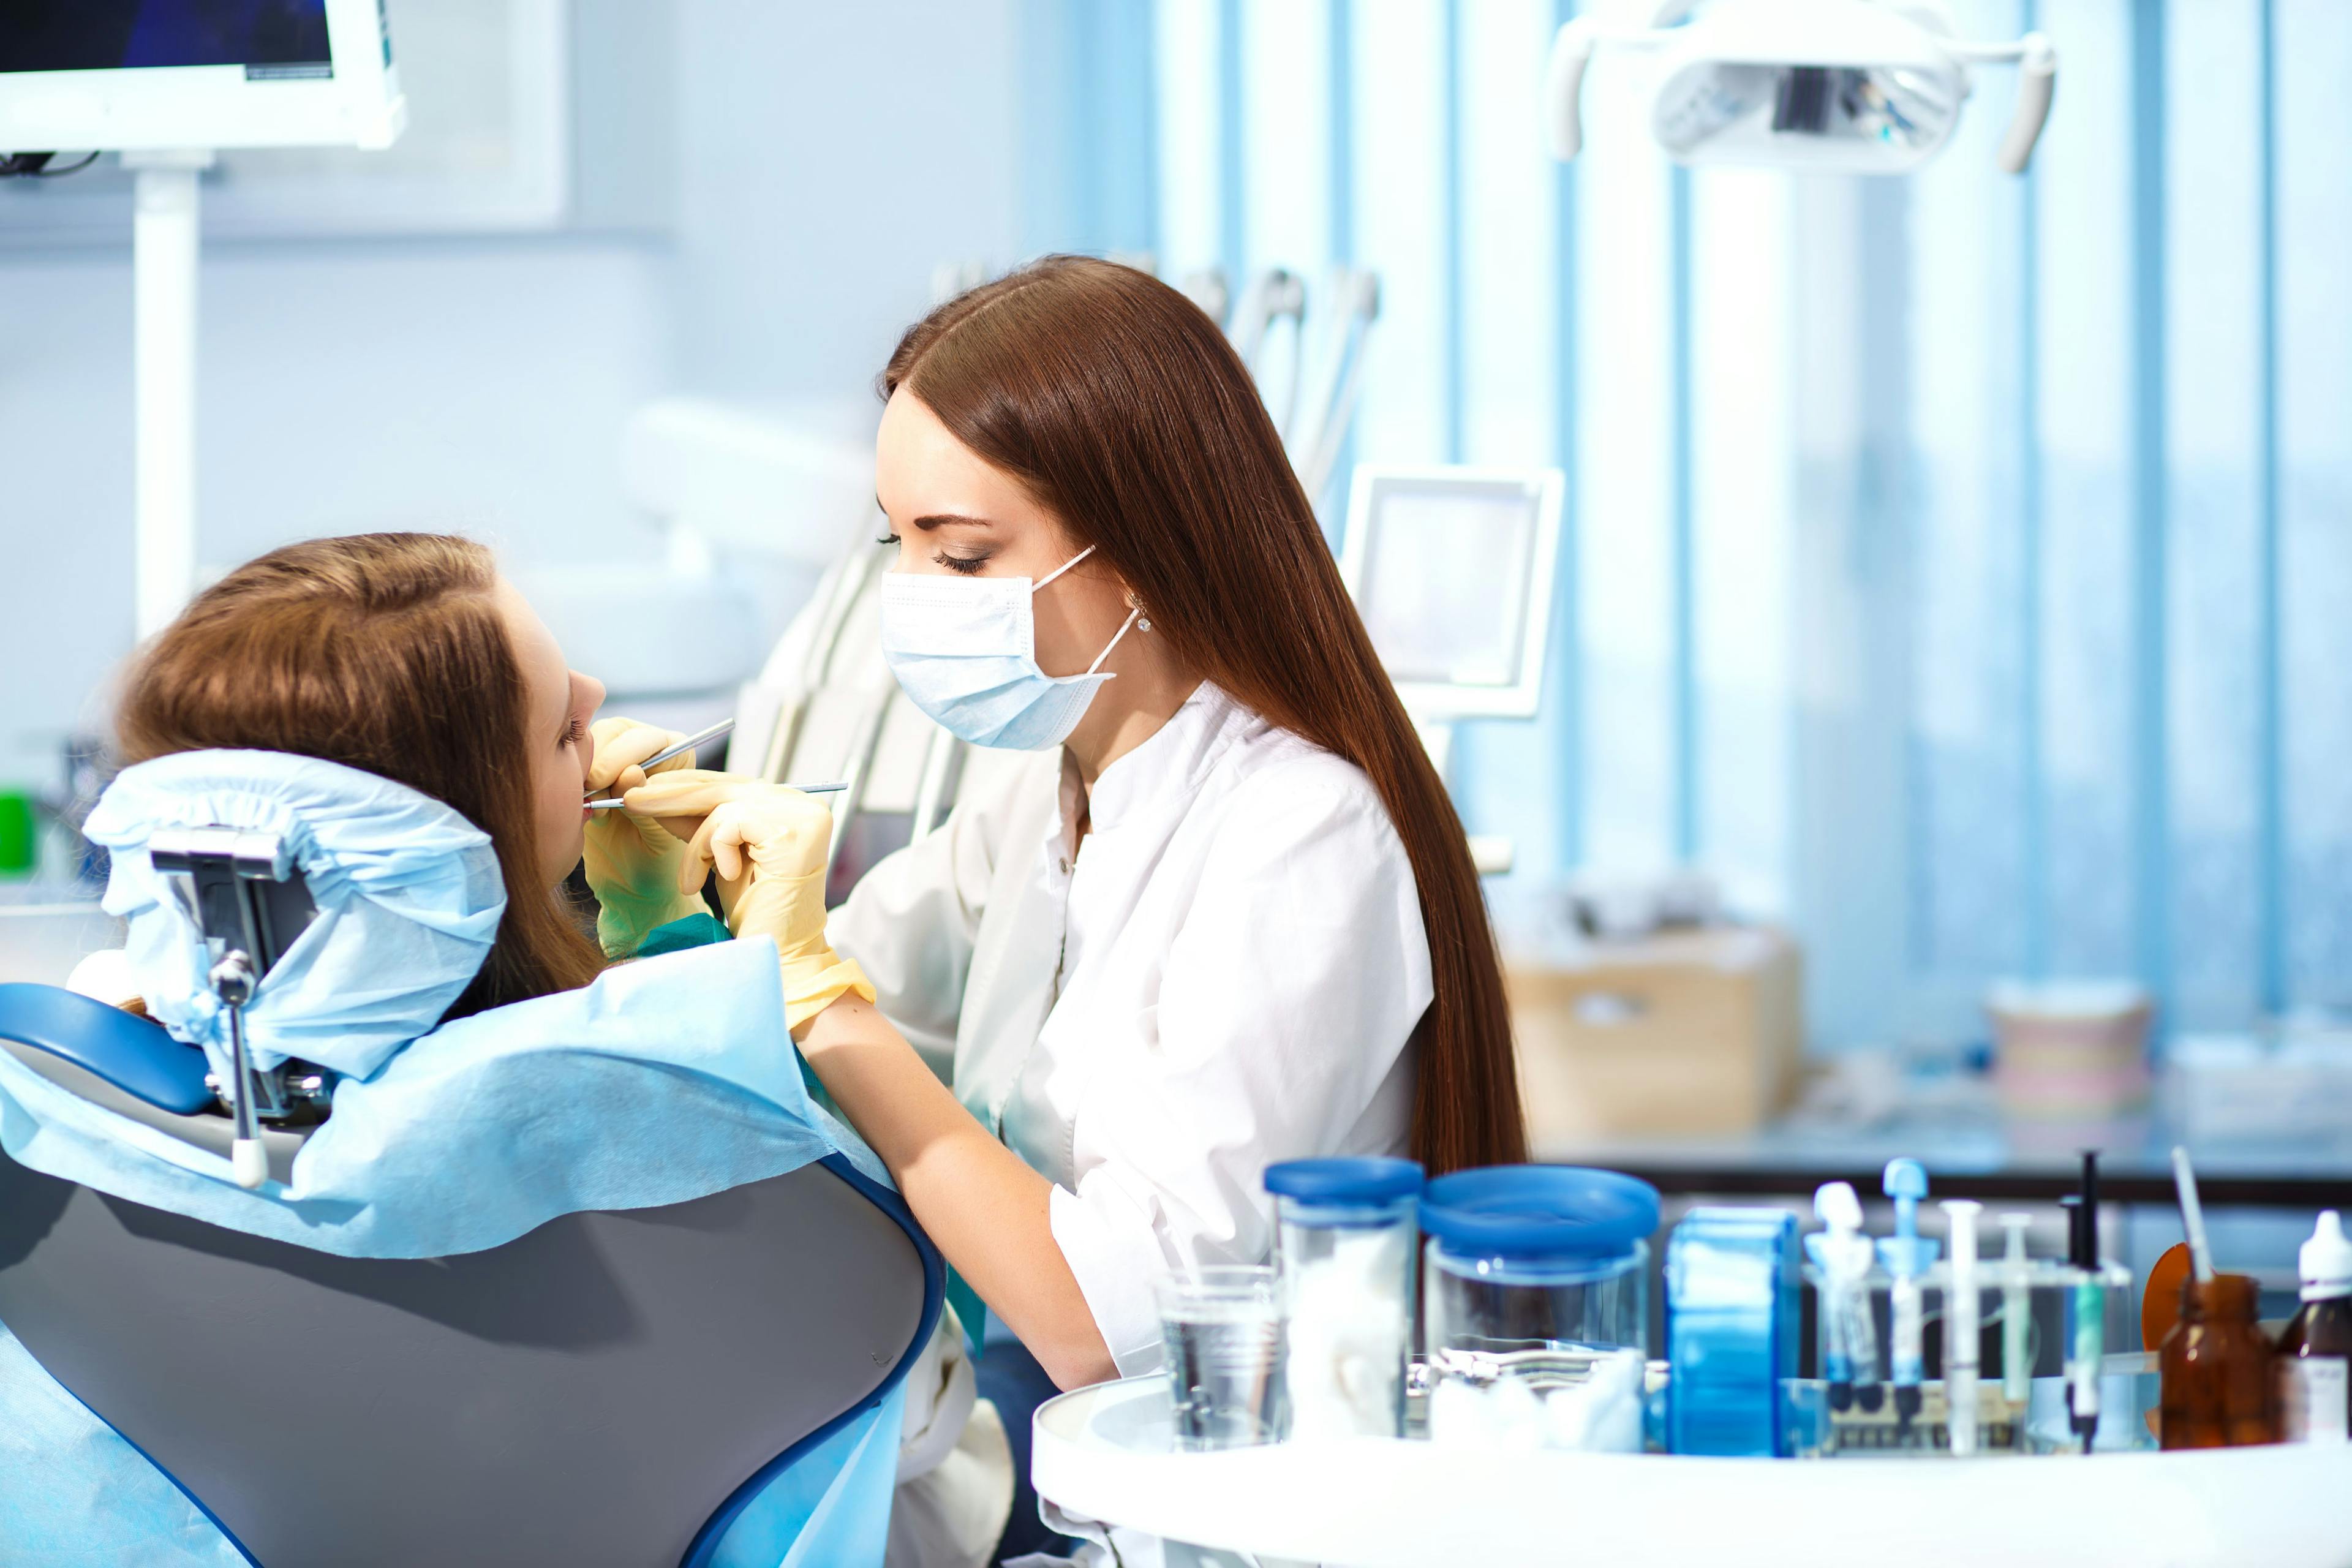 Professional woman dentist doctor working. woman at dental clinic. lady woman at dentist taking care of teeth. Dental care for people. Dentist holding dental device for fixing teeth. | ©maxbelchenko - stock.adobe.com